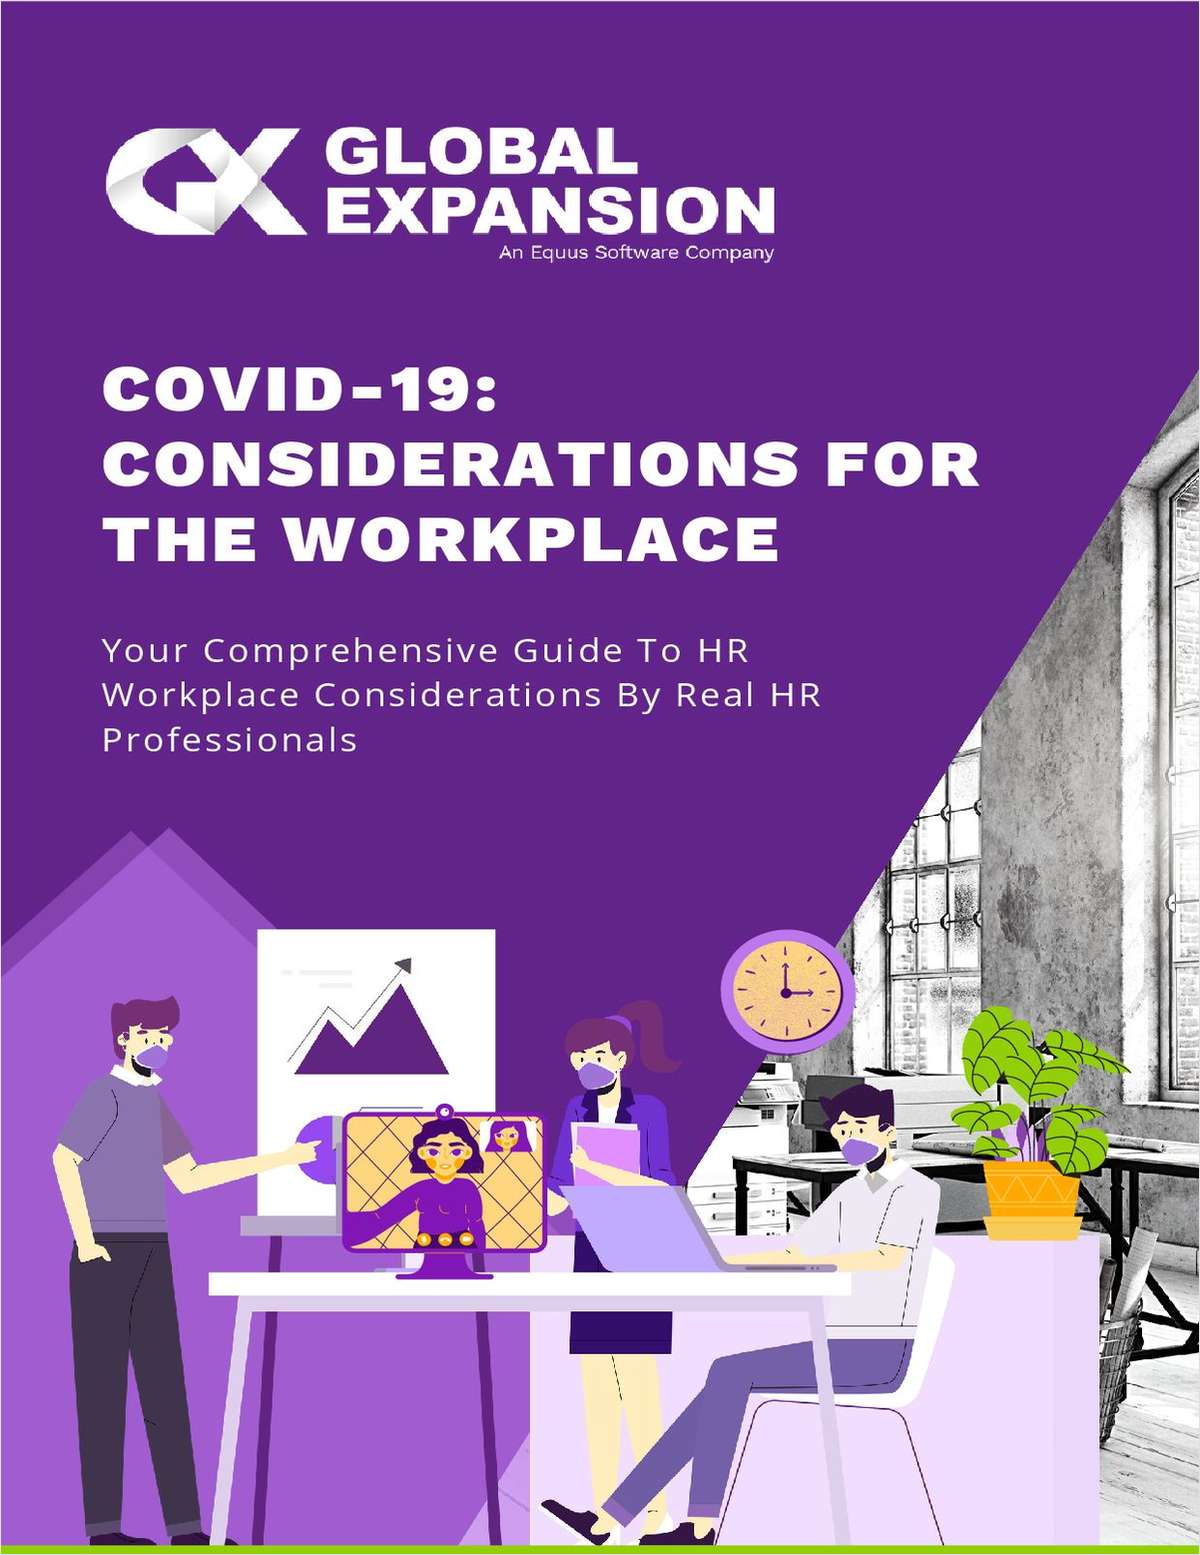 COVID-19: CONSIDERATIONS FOR THE WORKPLACE